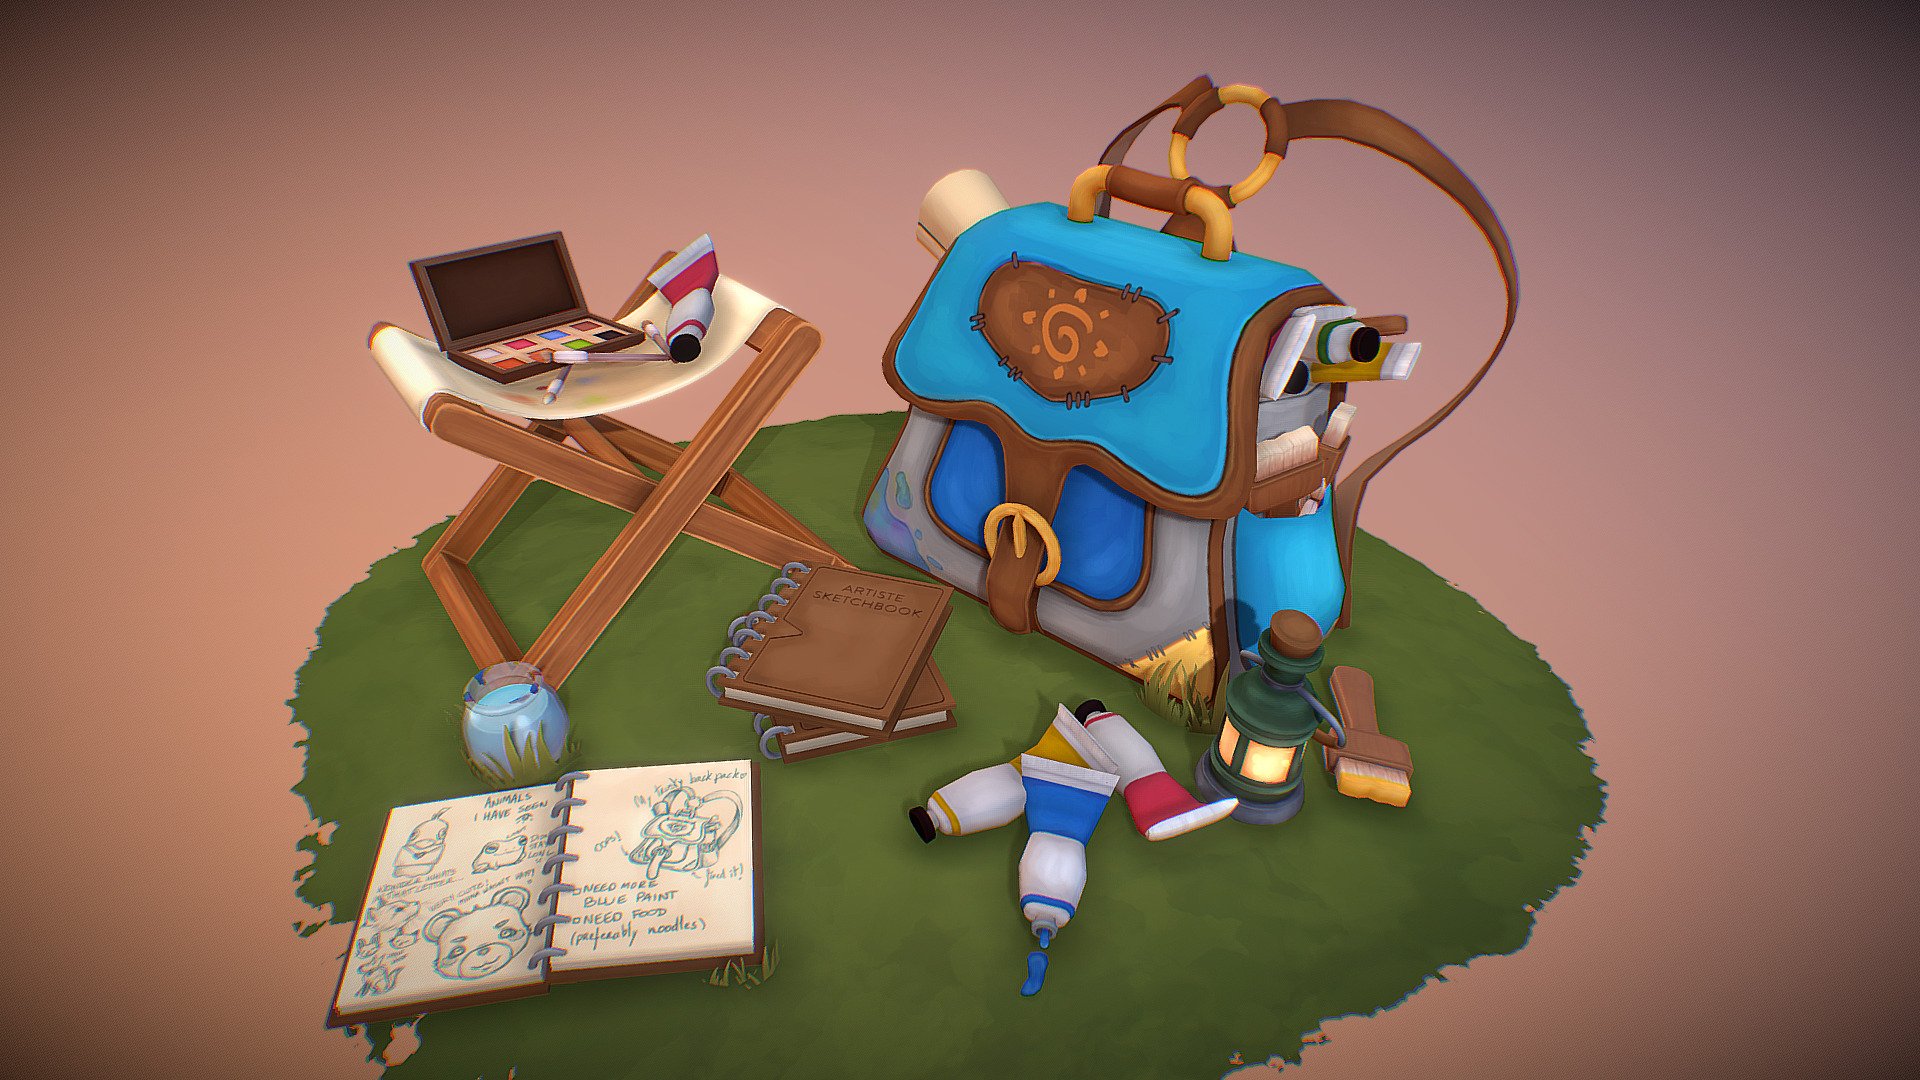 This is the perfect kit for those adventurous artists out there.

Equipped with so much paint that it almost doesn't fit in the bag, you can't go wrong with the amount of paint to bring for your journey!

Here's my entry for the #AdventureKitChallenge ! 
I thought I would create I kit I would see myself using haha 3d model